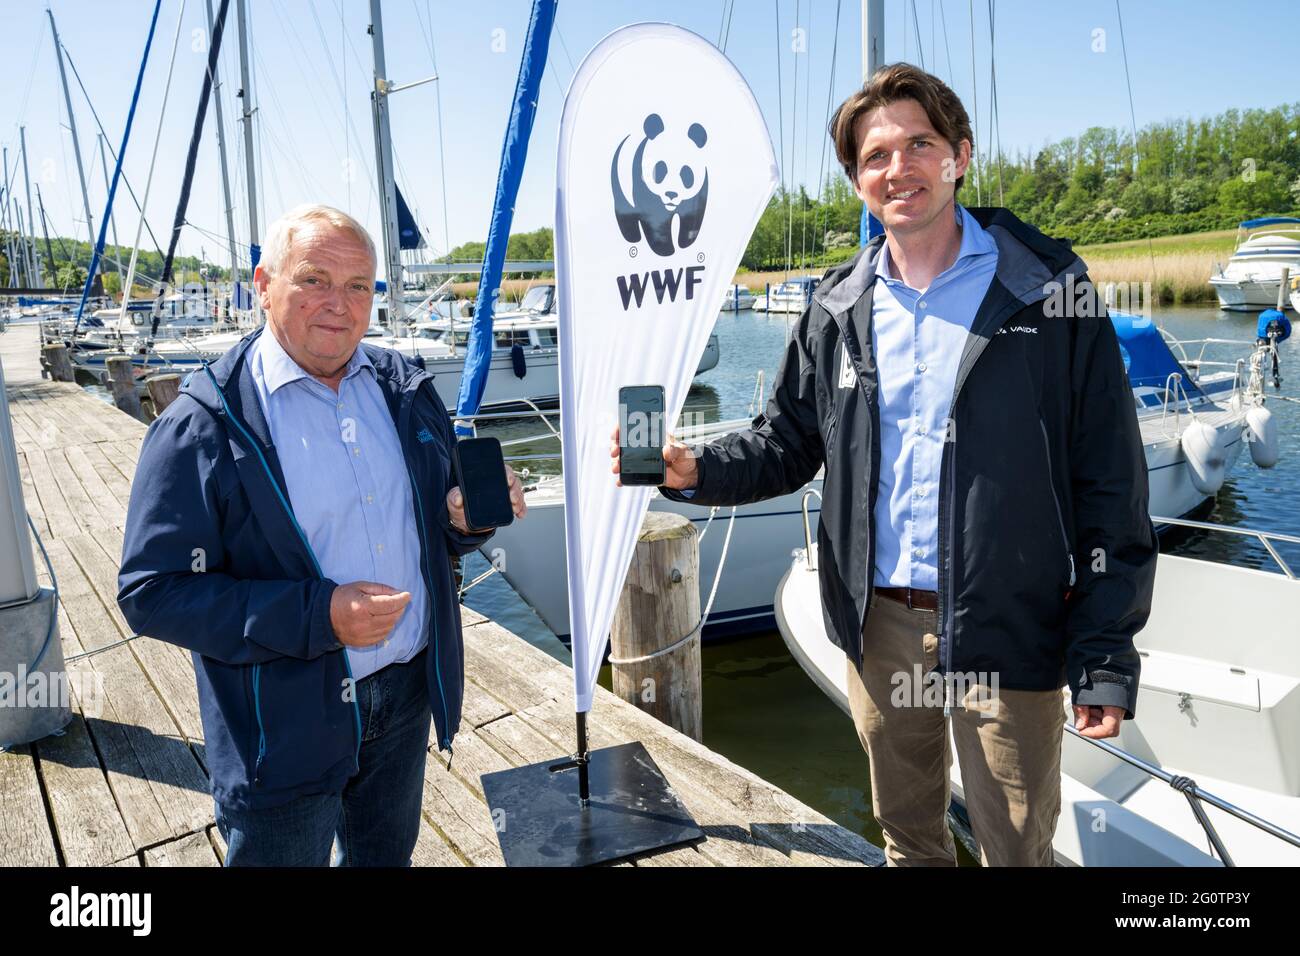 Seedorf, Germany. 03rd June, 2021. Till Backhaus (l, SPD), Minister of Agriculture and Environment of Mecklenburg-Western Pomerania, and Florian Hoffmann, biologist from WWF, present the new navigation app for better protection of marine protected areas. In the future, the app will enable anglers and recreational boaters to navigate through the waters south of Rügen in a way that complies with the law and protects animals. The WWF commissioned the app together with the State Office for Agriculture and the Environment of Western Pomerania. Credit: Stefan Sauer/dpa/Alamy Live News Stock Photo